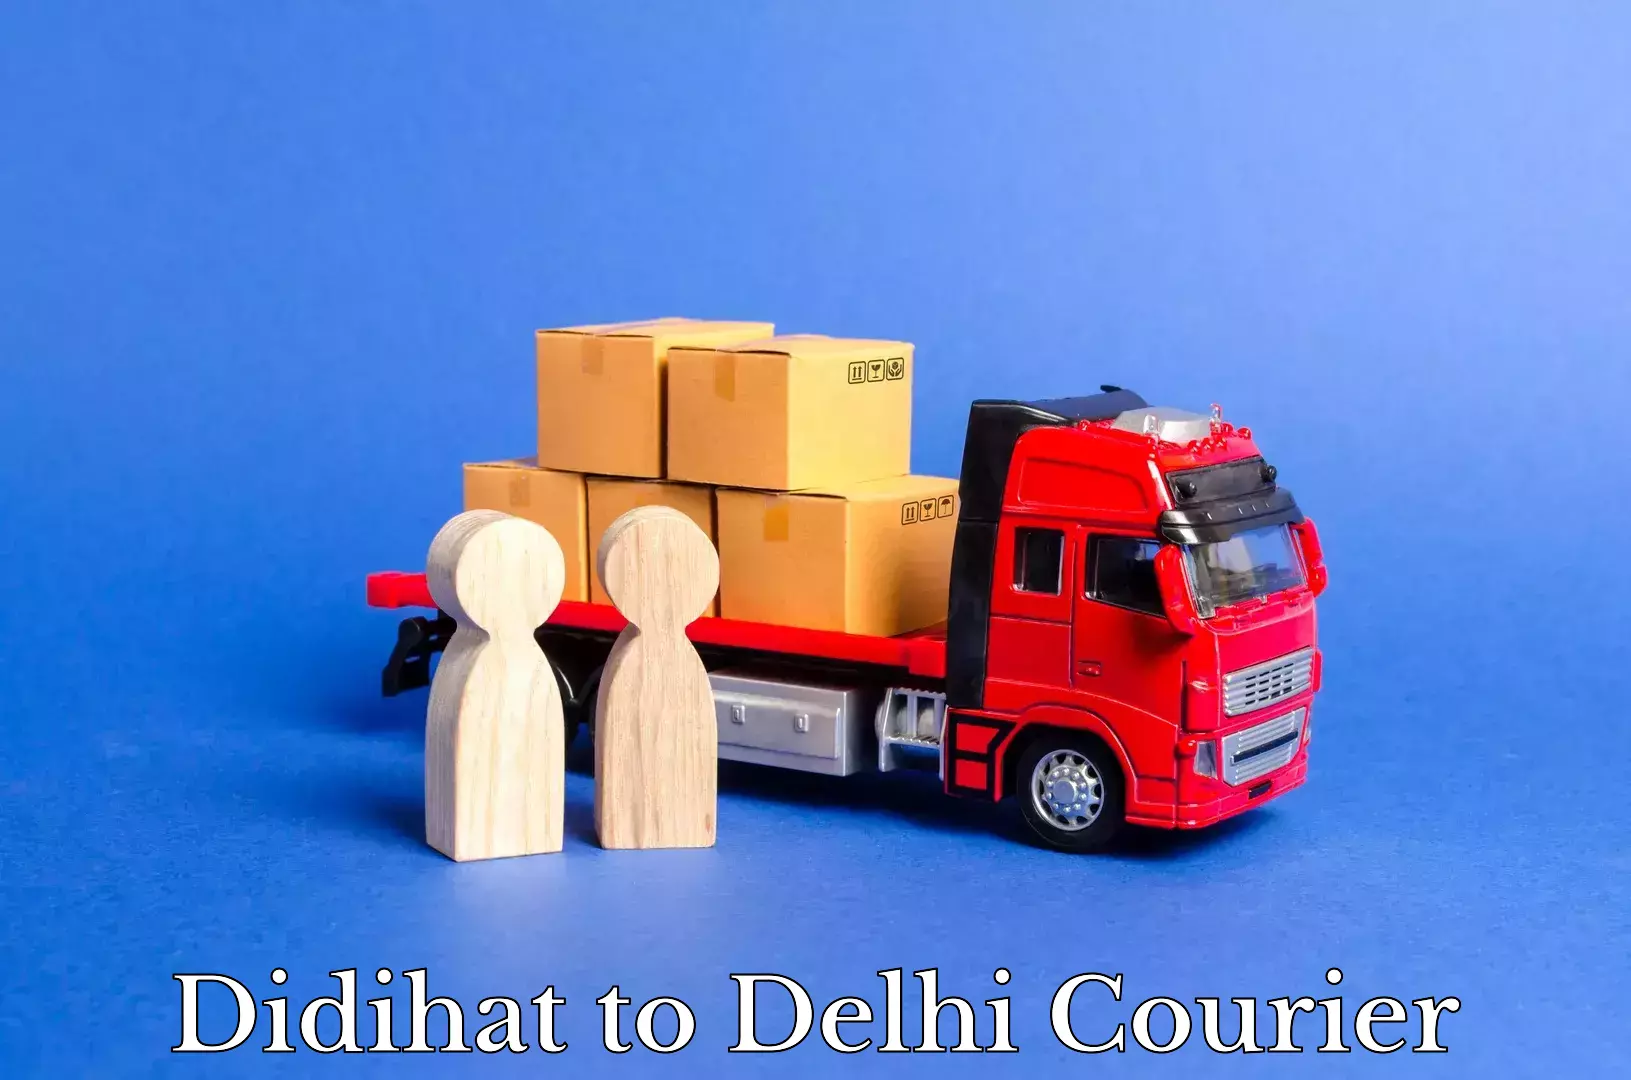 Sustainable shipping practices Didihat to Delhi